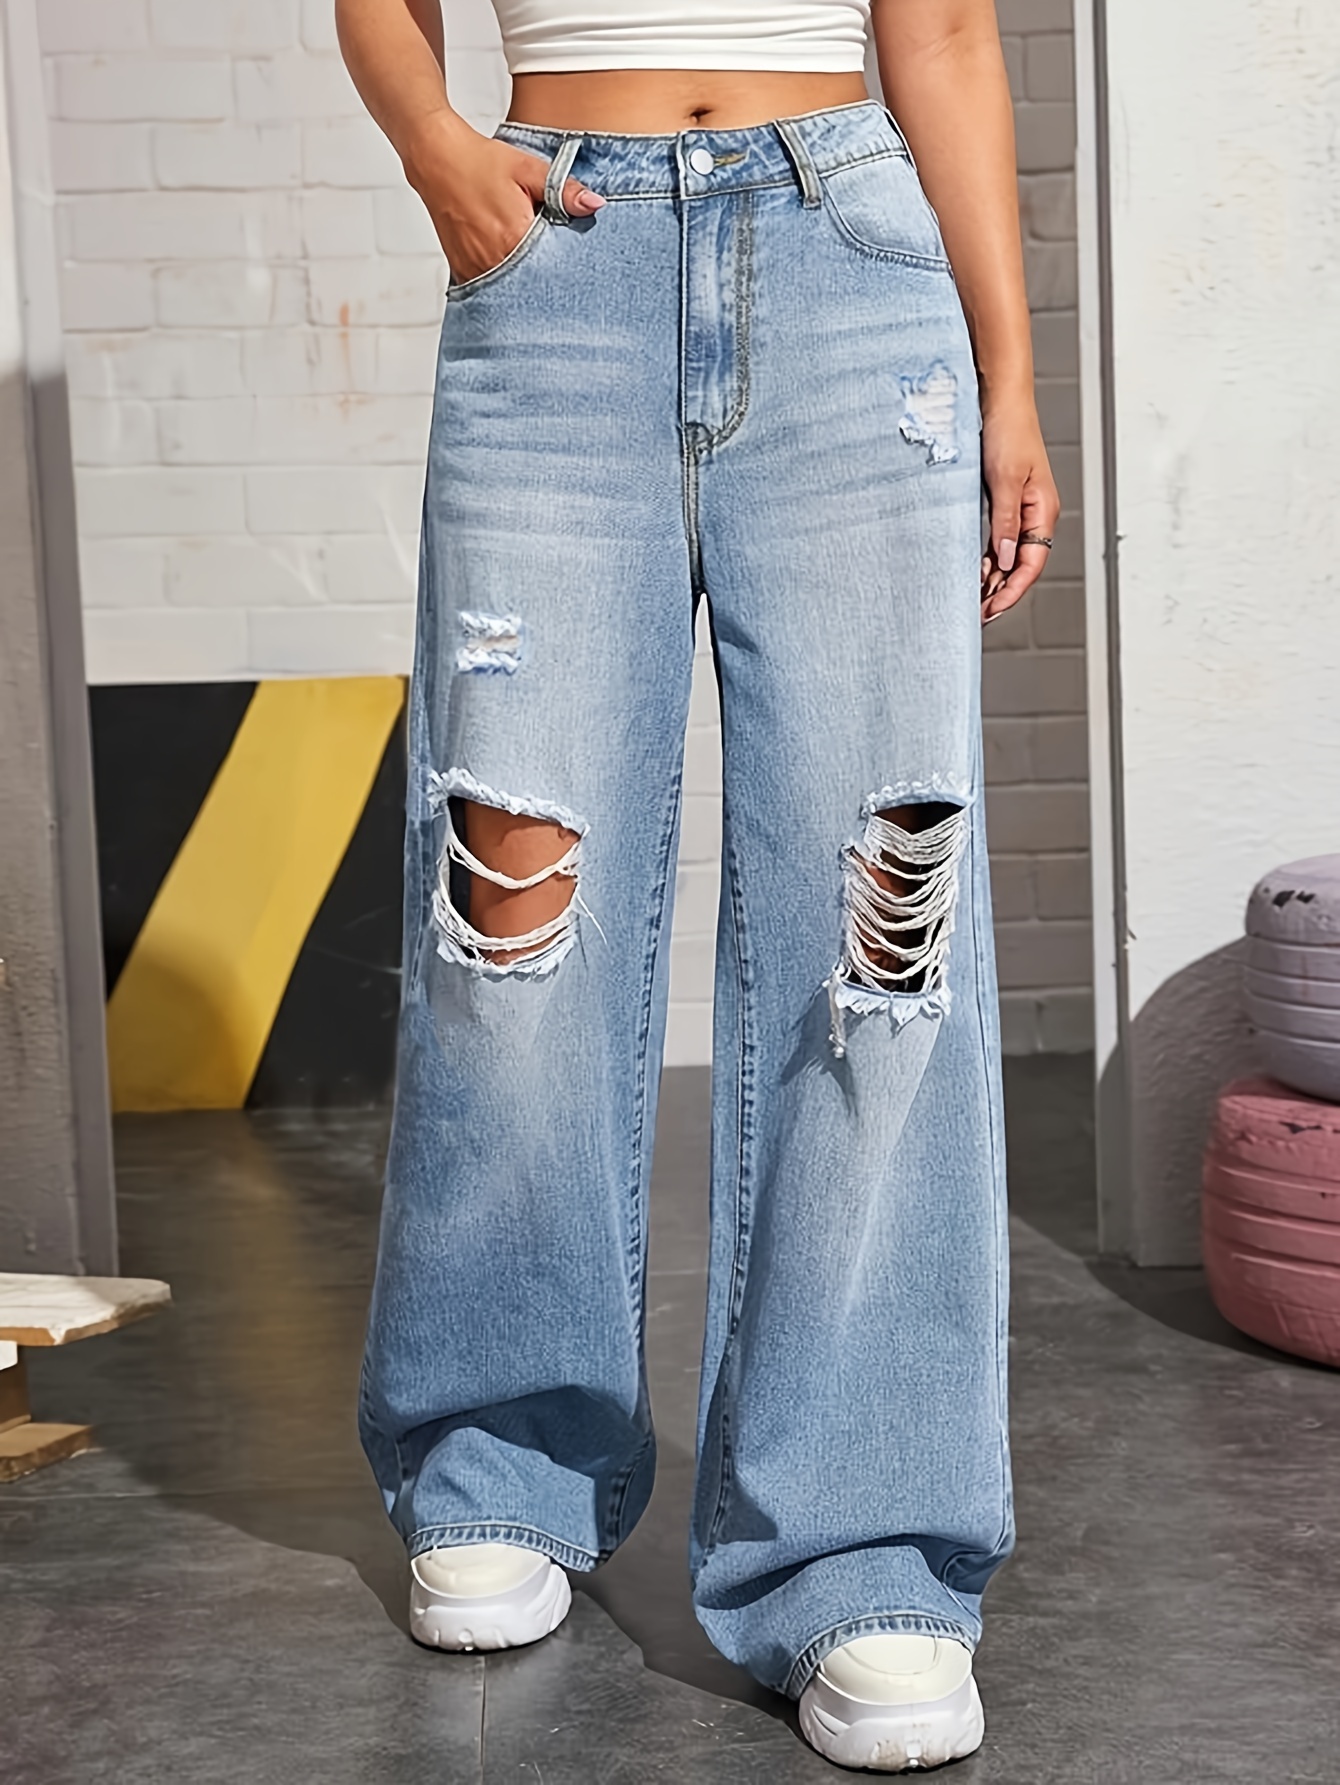 SELONE Cute Jeans for Women Trendy With Pockets Denim Ripped Trendy Casual  Long Pant Fashion Jeans Pants Holes Jeans Jeans Pants for Casual Outings